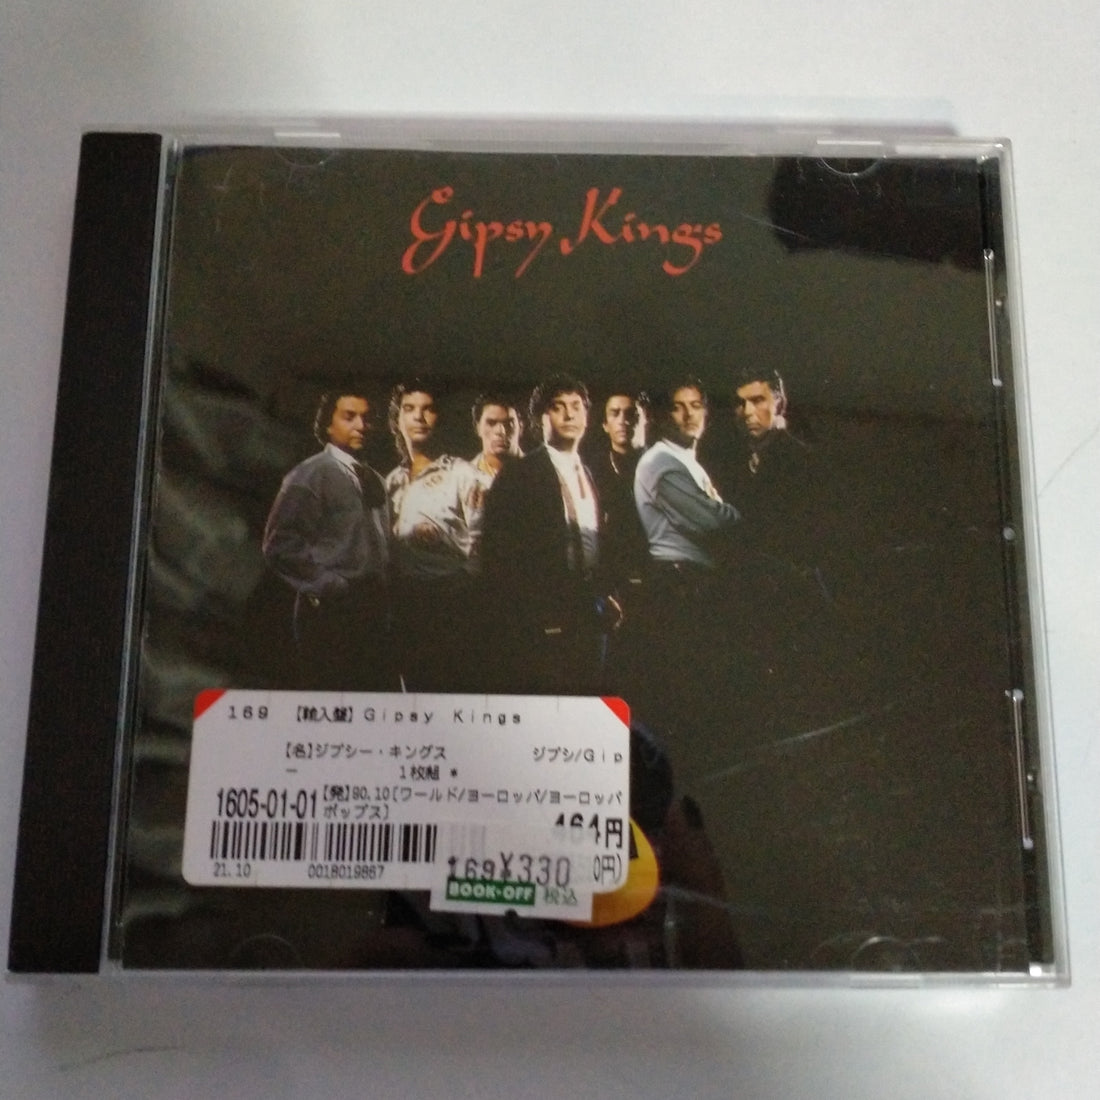 Buy Gipsy Kings : Gipsy Kings (CD) Online for a great price